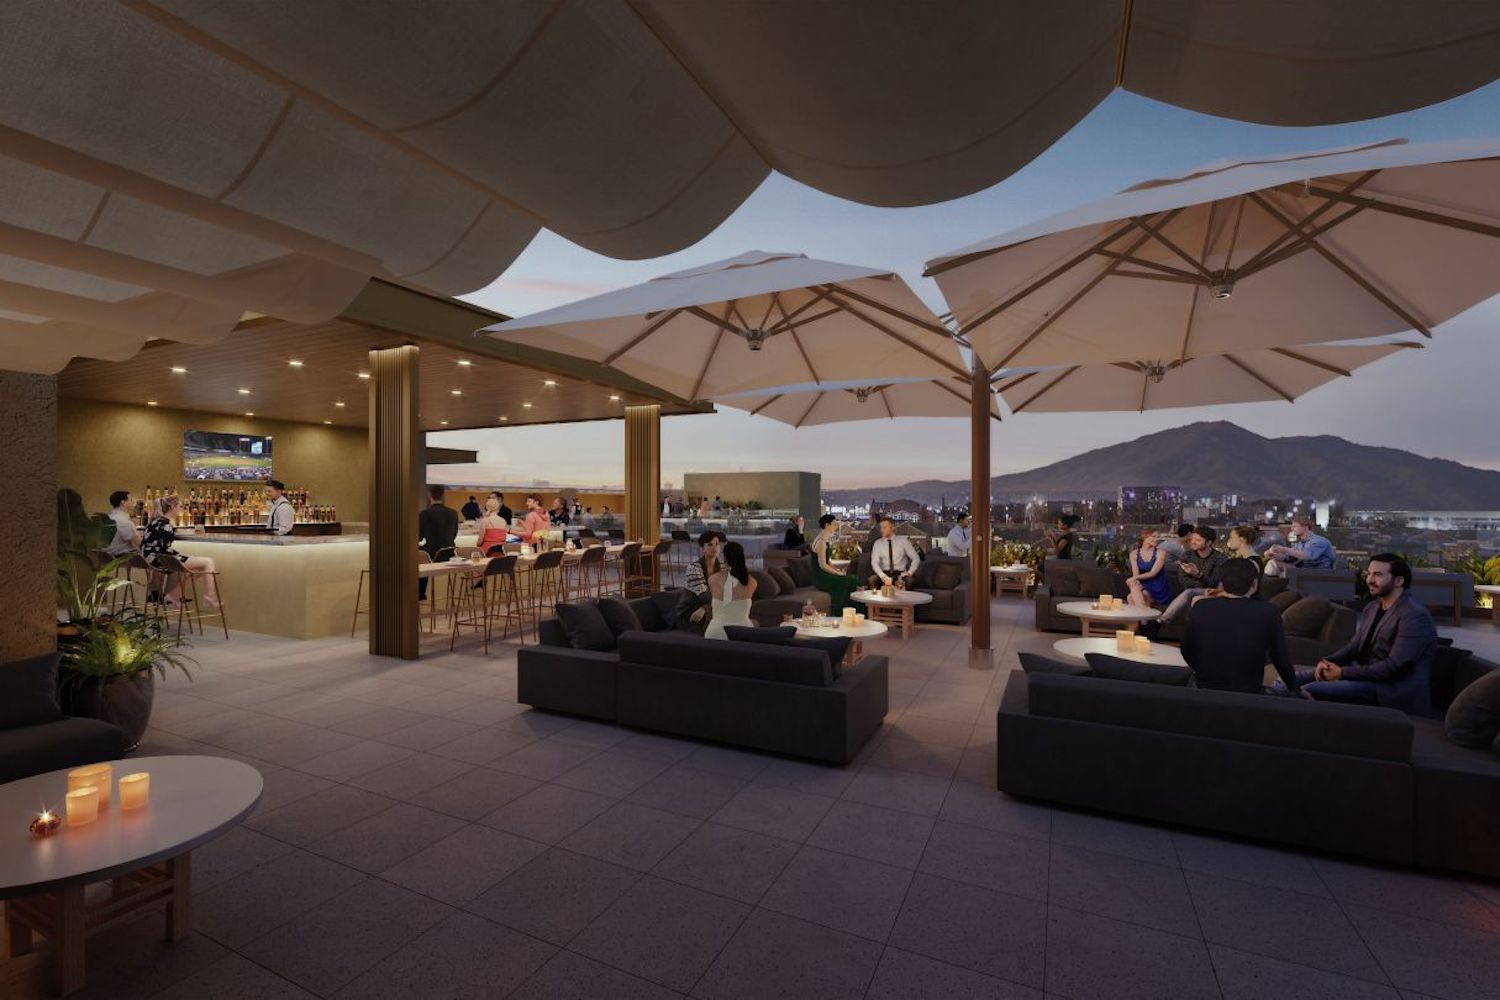 outdoor rooftop bar at sunset with big umbrellas